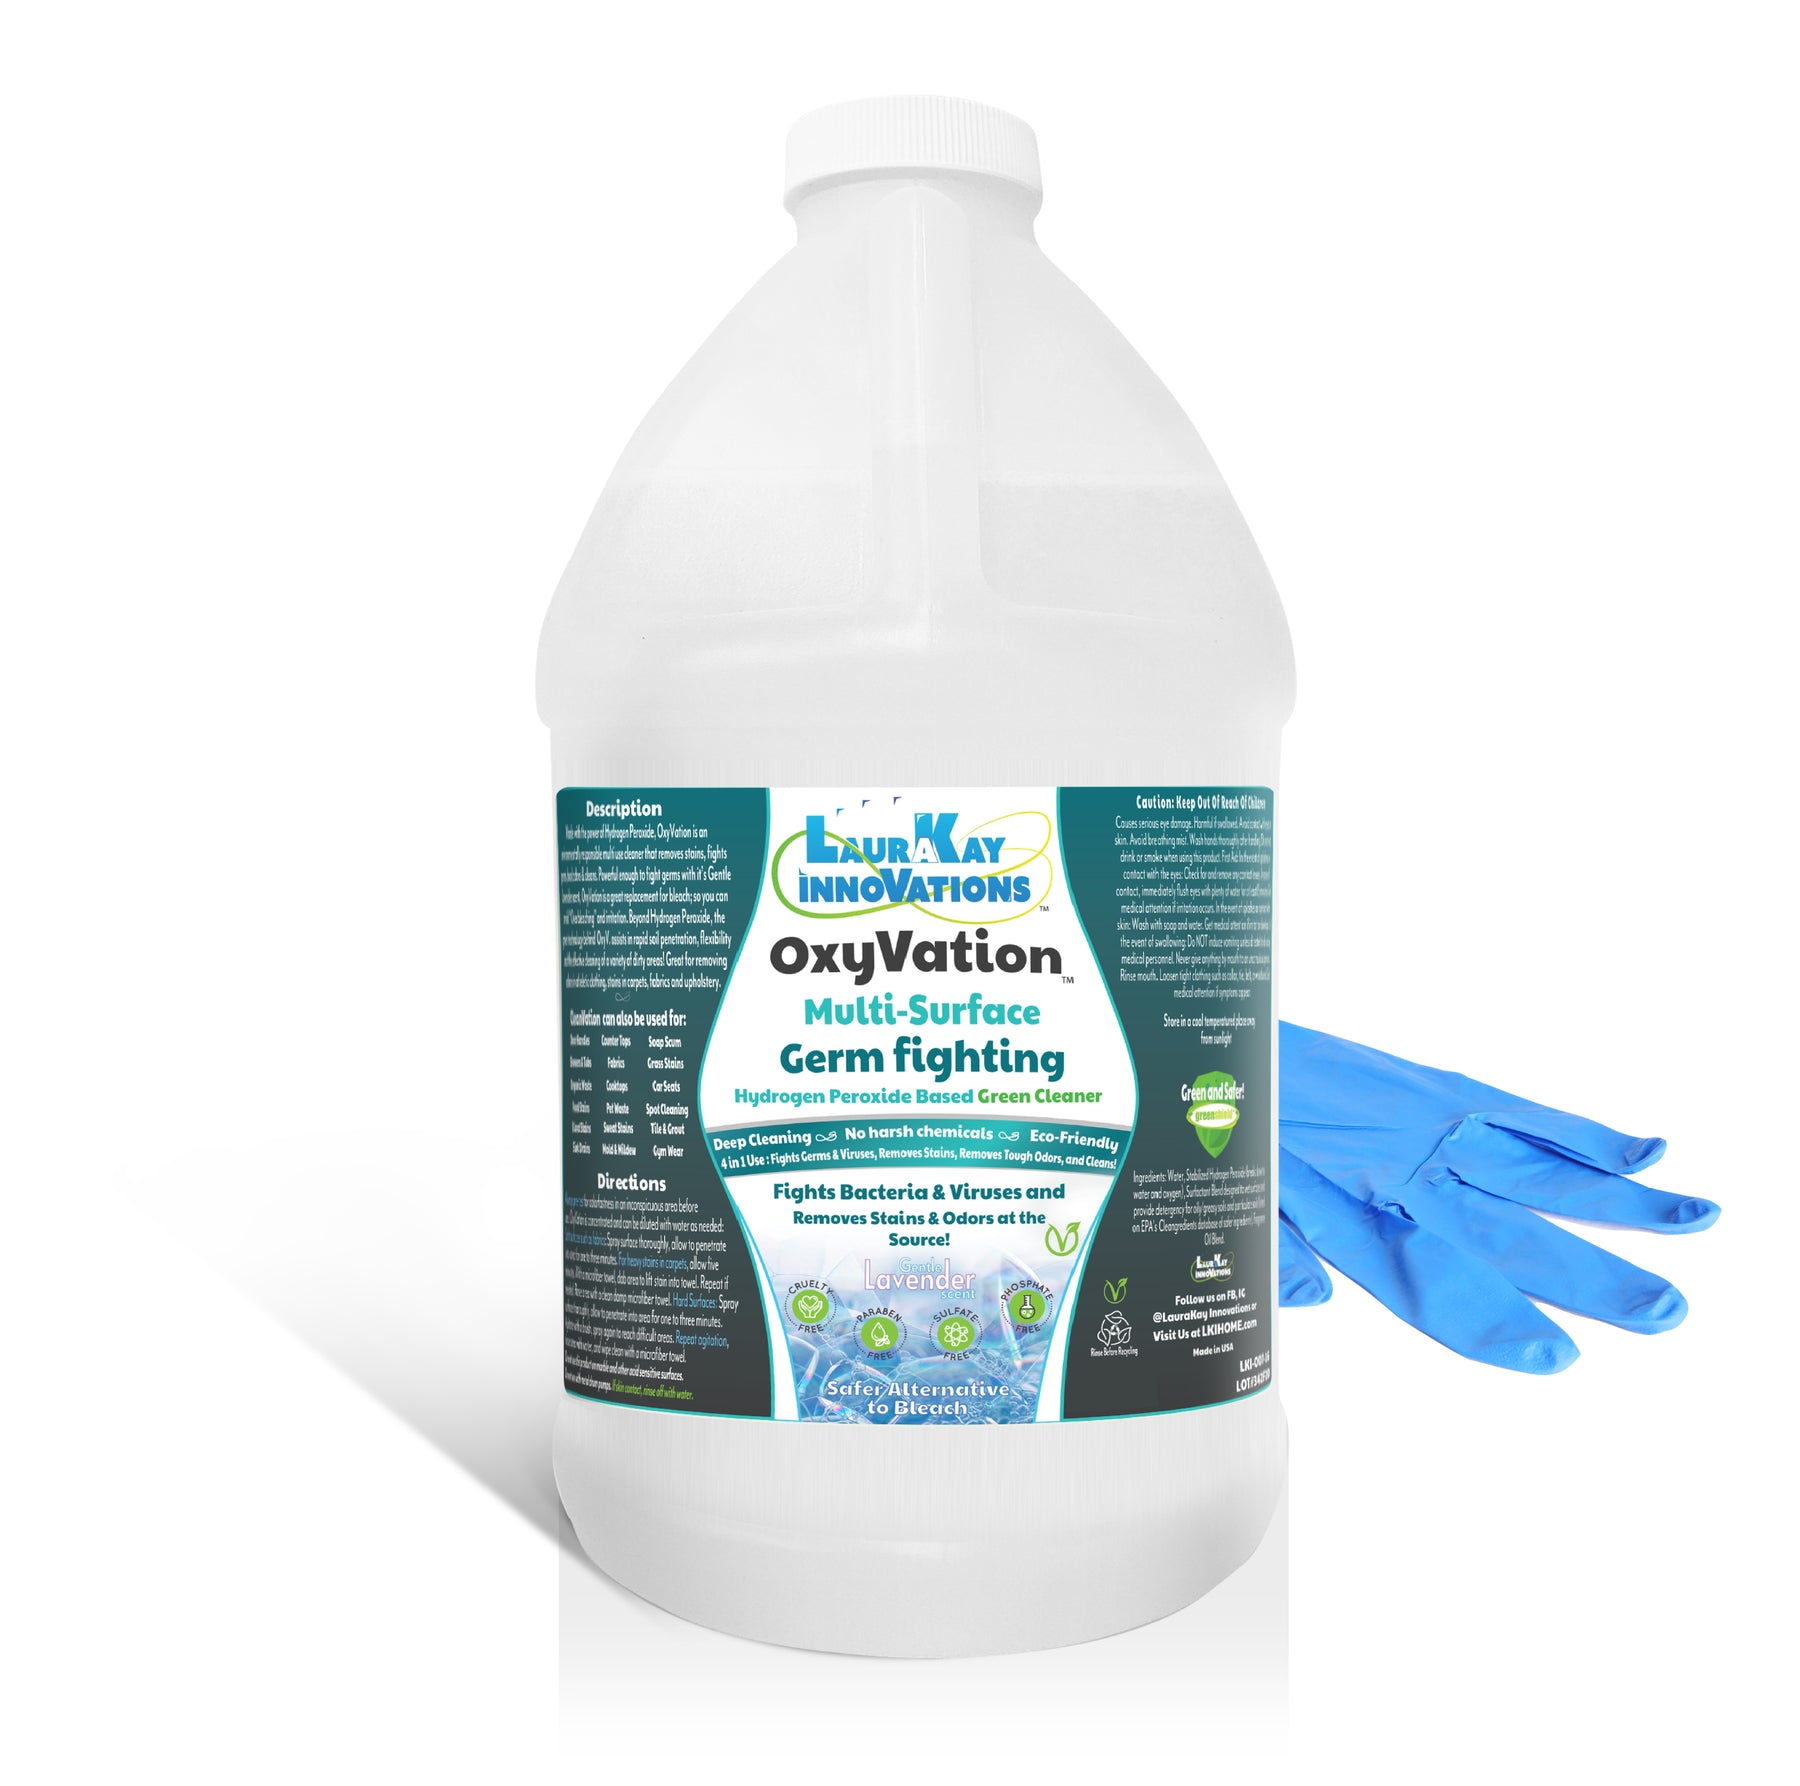 Spot Solution 1 Gallon Carpet & Upholstery Spot Cleaner for Stains Odor Free - Removes Pet Stain and People Stains No Soap, No Residue 128 oz